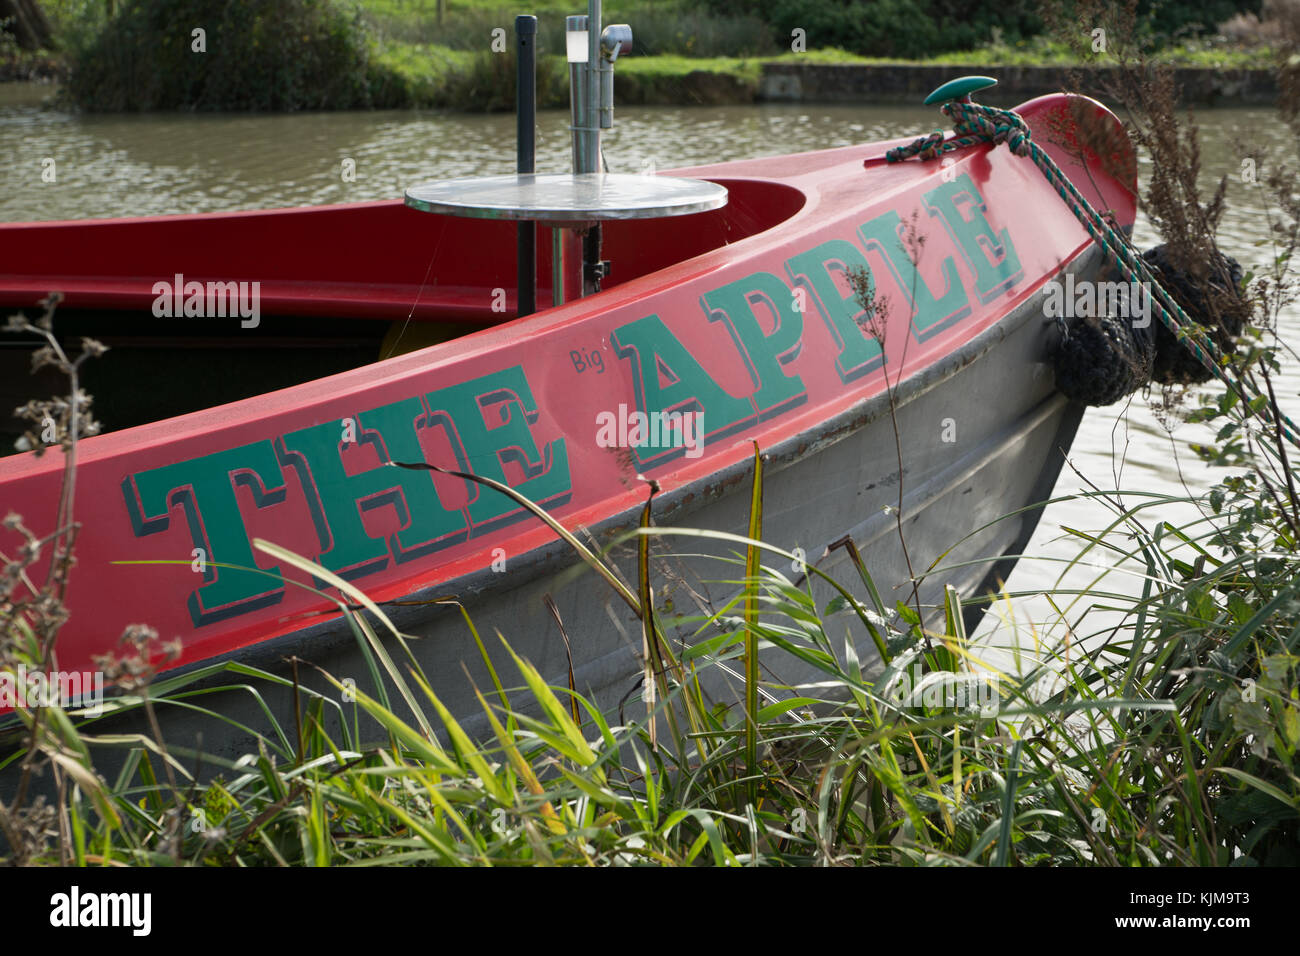 the big apple name on leisure boat Stock Photo